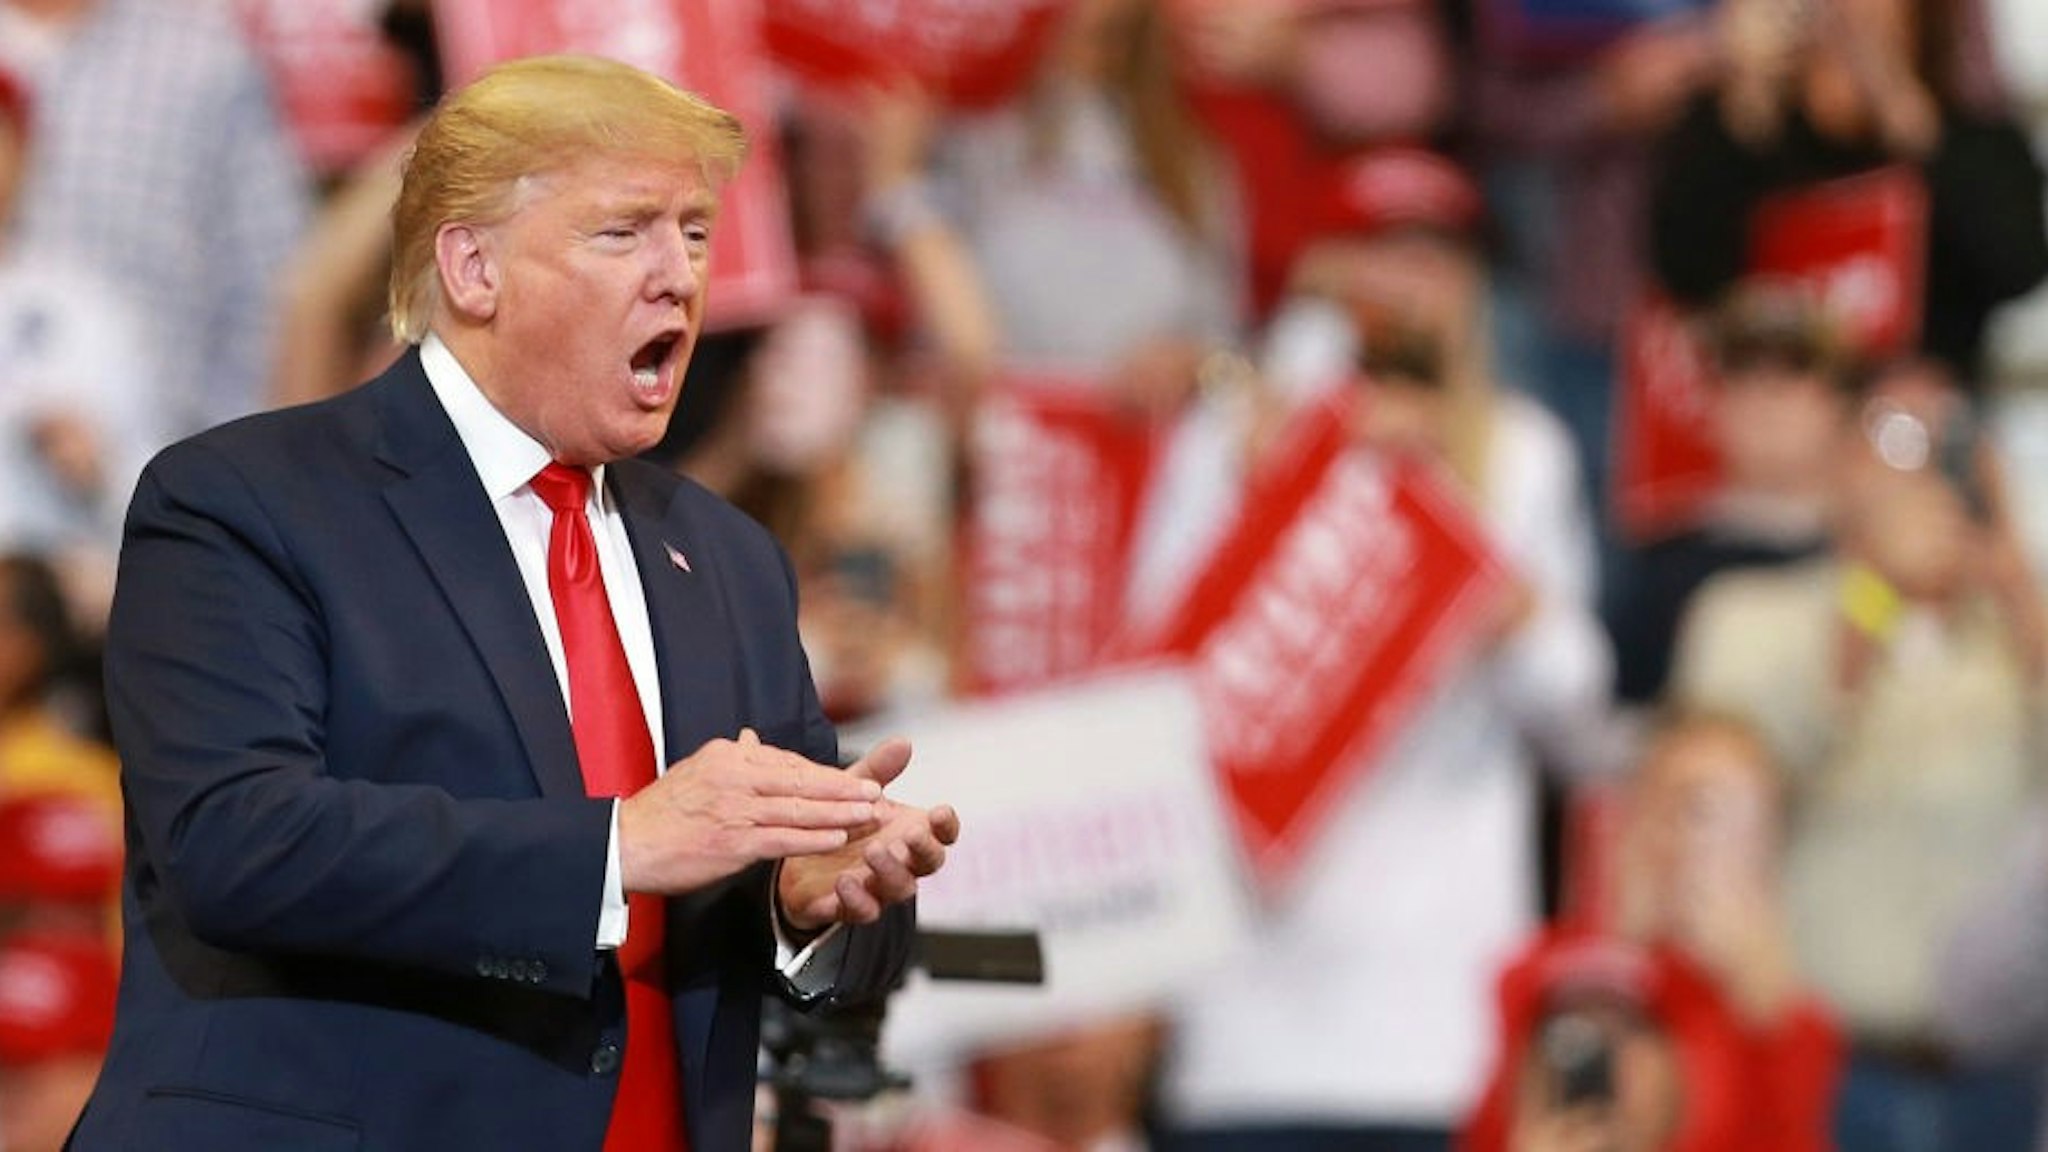 U.S. President Donald Trump speaks during a rally at CenturyLink Center on November 14, 2019 in Bossier City, Louisiana. President Trump headlined the rally to support Louisiana Republican gubernatorial candidate Eddie Rispone, who is looking to unseat incumbent Democratic Gov. John Bel Edwards.